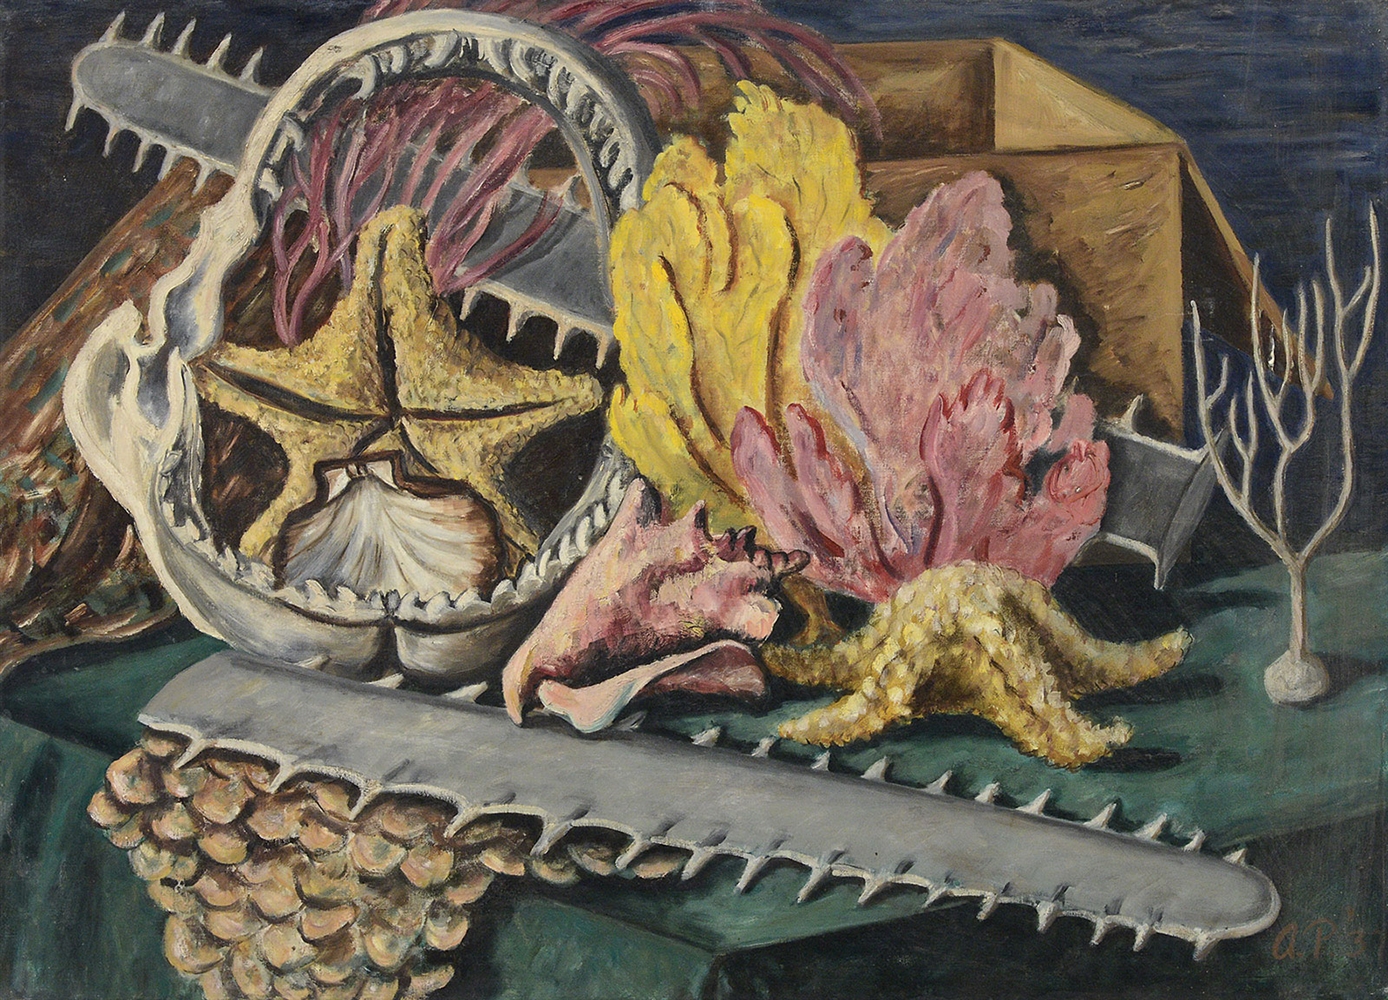 ALZIRA BOEHM PEIRCE (AMERICAN, 1908-2010) RELICS FROM THE SEA                                                                                                                                           